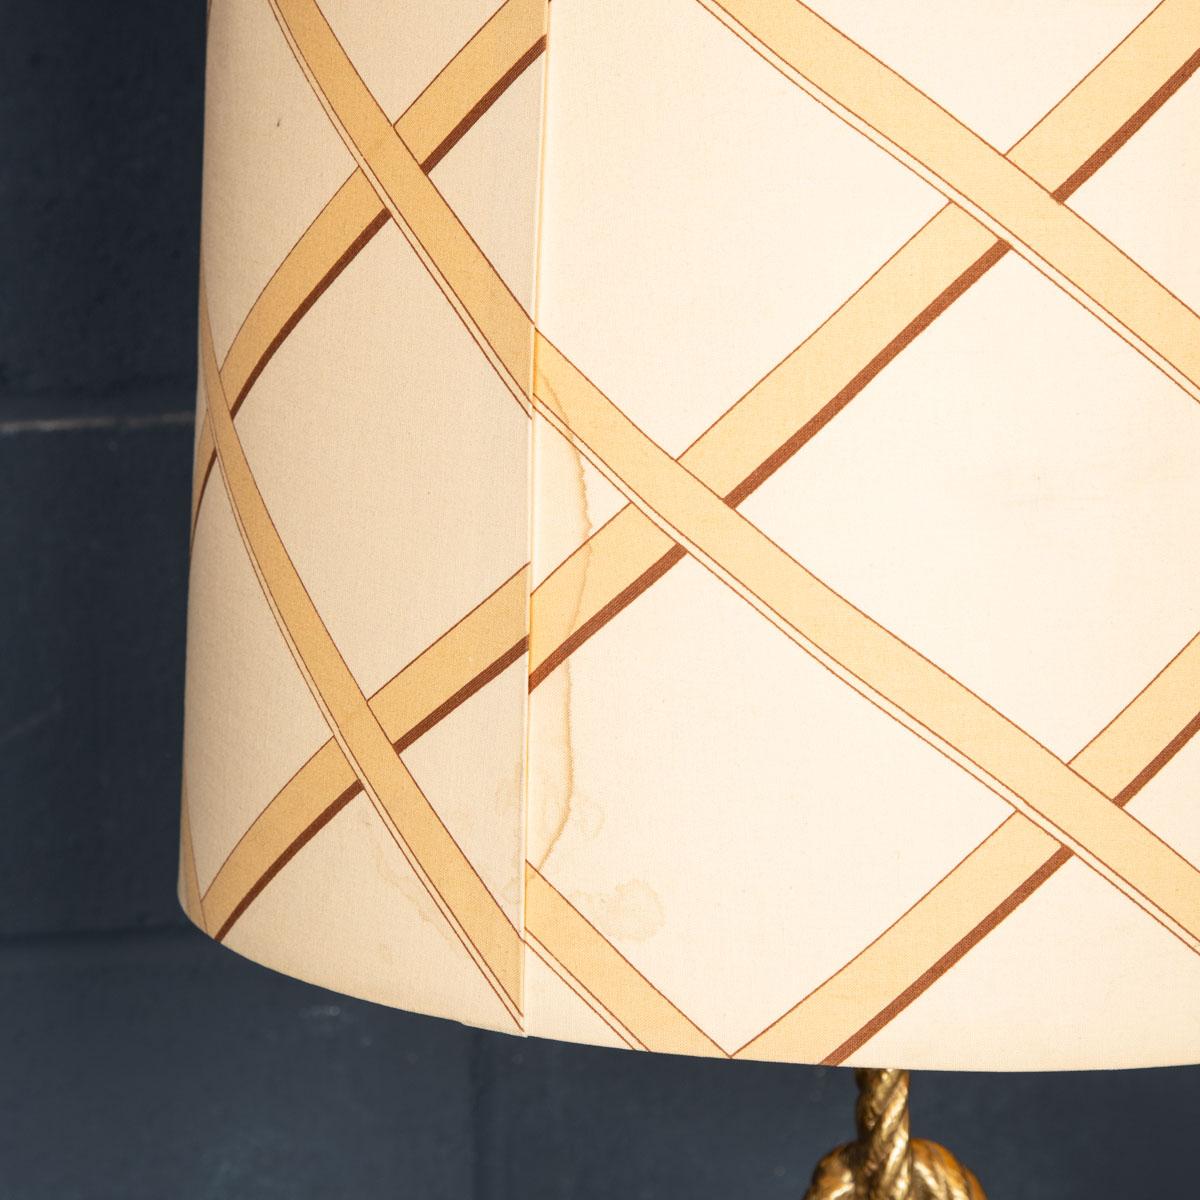 20th Century Large Table Lamp with Original Shade Attributable to Gucci, c.1980 For Sale 6